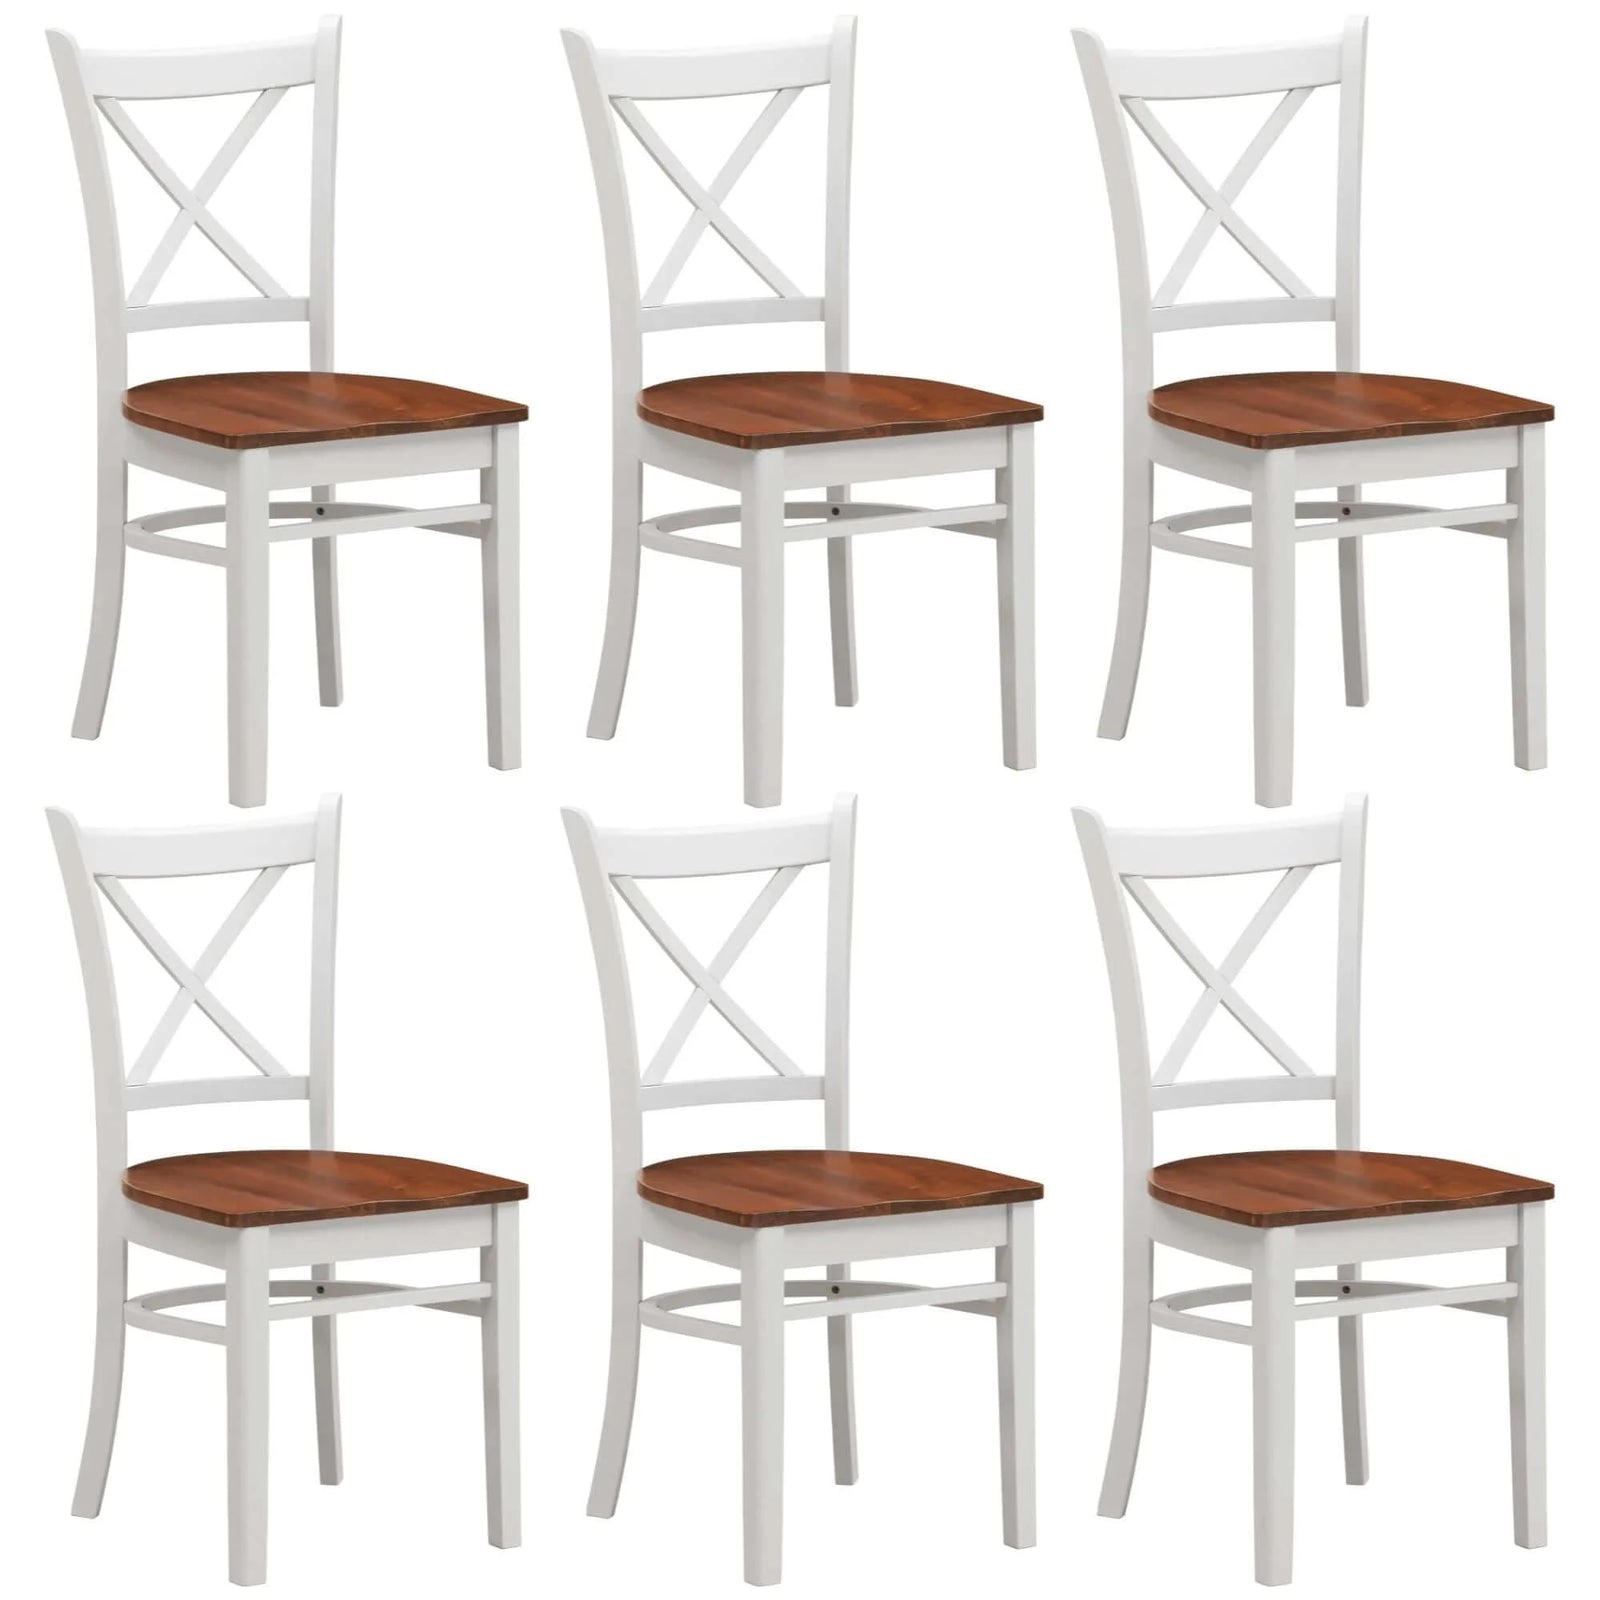 Buy lupin dining chair set of 6 crossback solid rubber wood furniture - white oak - upinteriors-Upinteriors